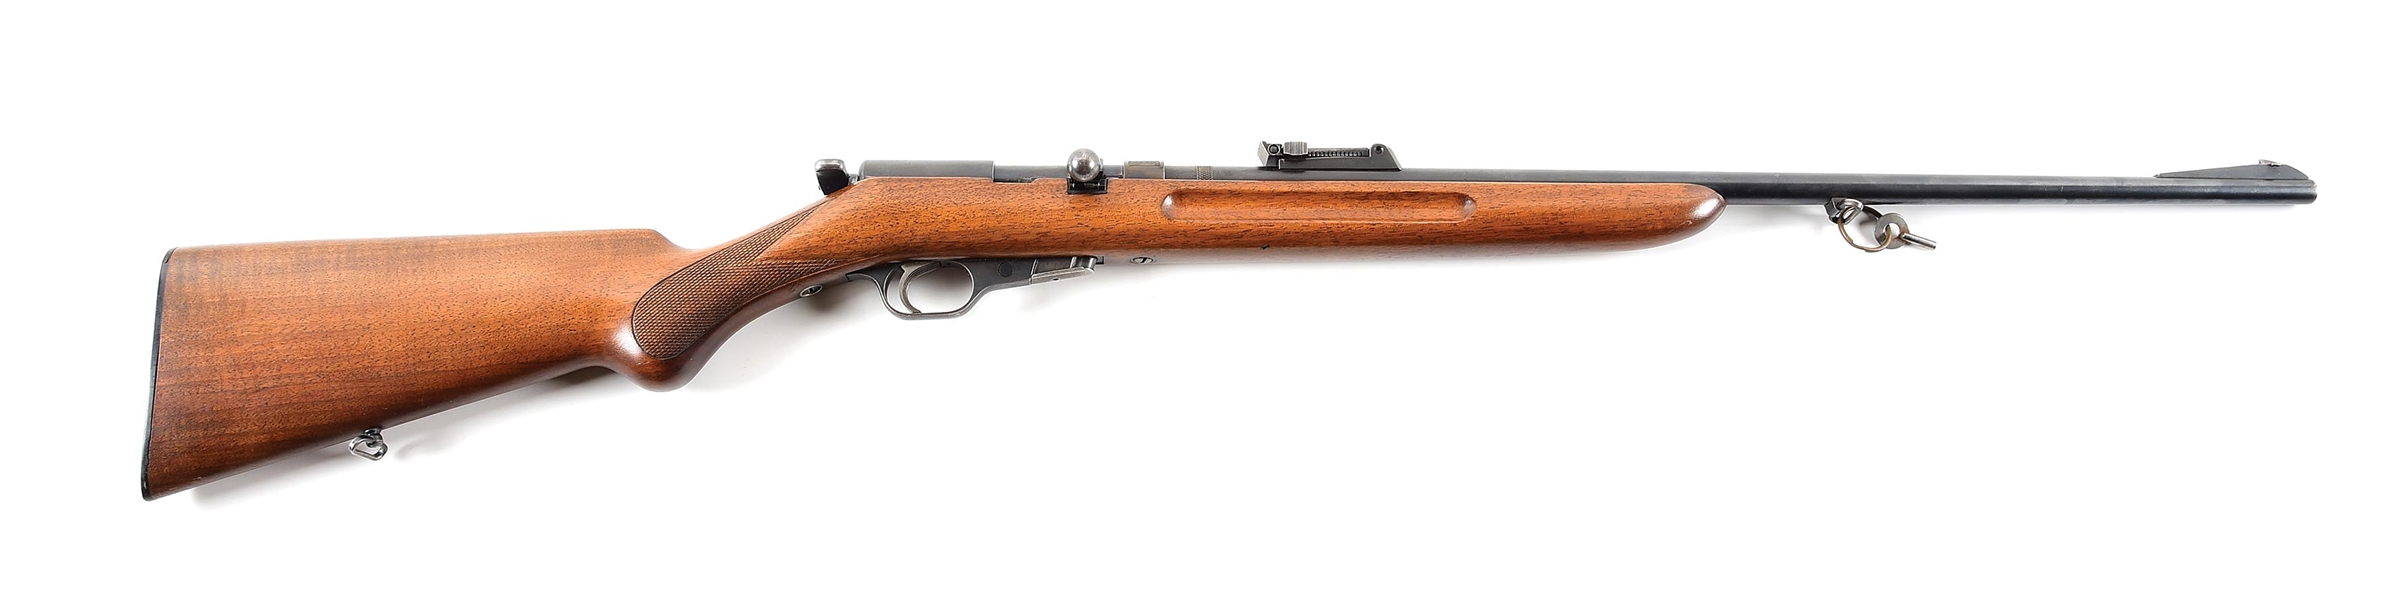 (C) SCARCE PRE-WAR WALTHER MODEL II SEMI-AUTOMATIC & BOLT ACTION RIFLE.